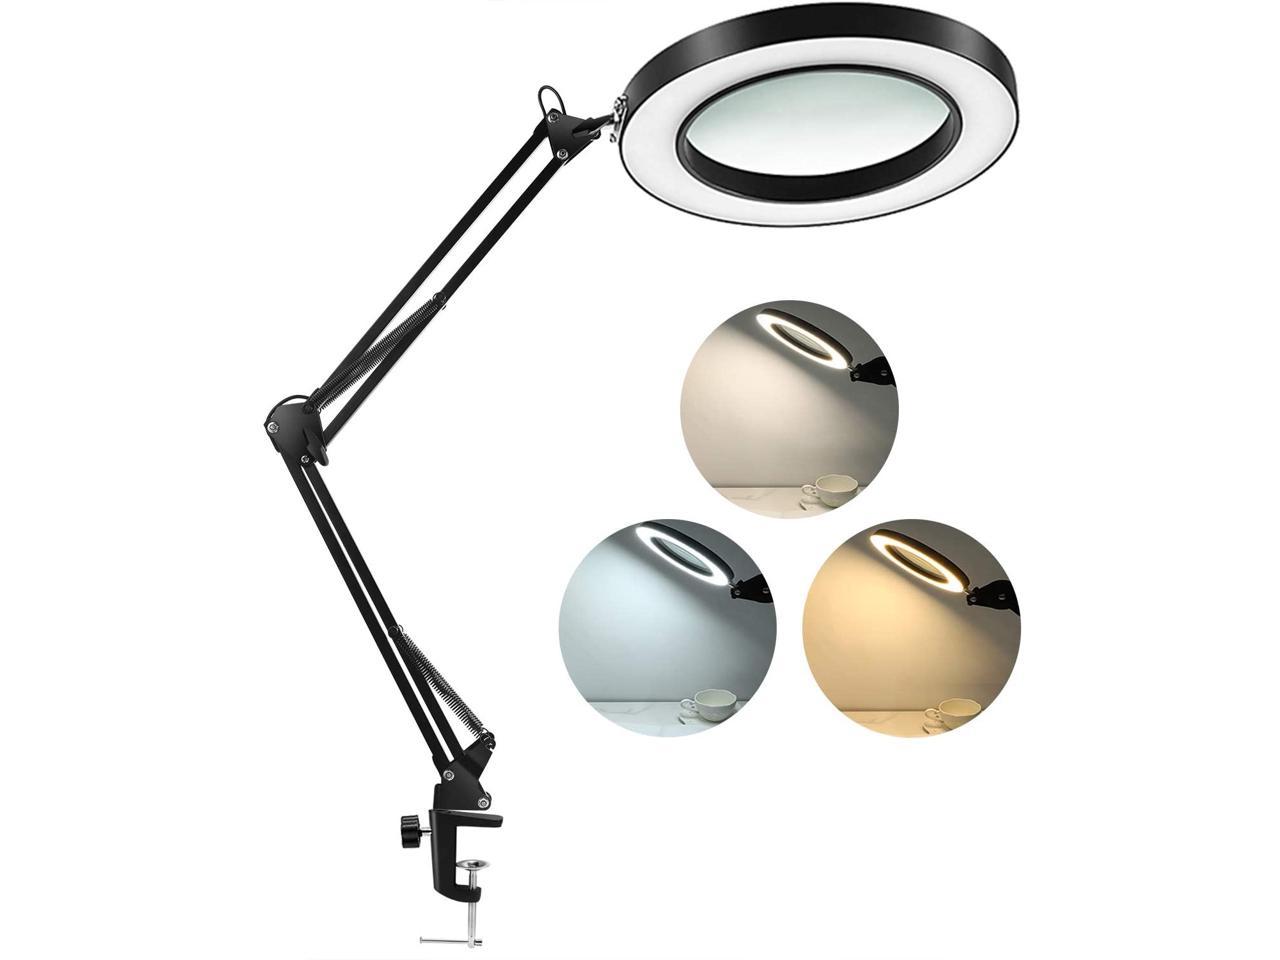 Crafts LANCOSC Magnifying Glass with Light for Close Work Stepless Dimmable LED Magnifier Desk Lamp for Repair 5-Diopter White Adjustable Swivel Arm with Clamp 3 Color Modes Reading Sewing 